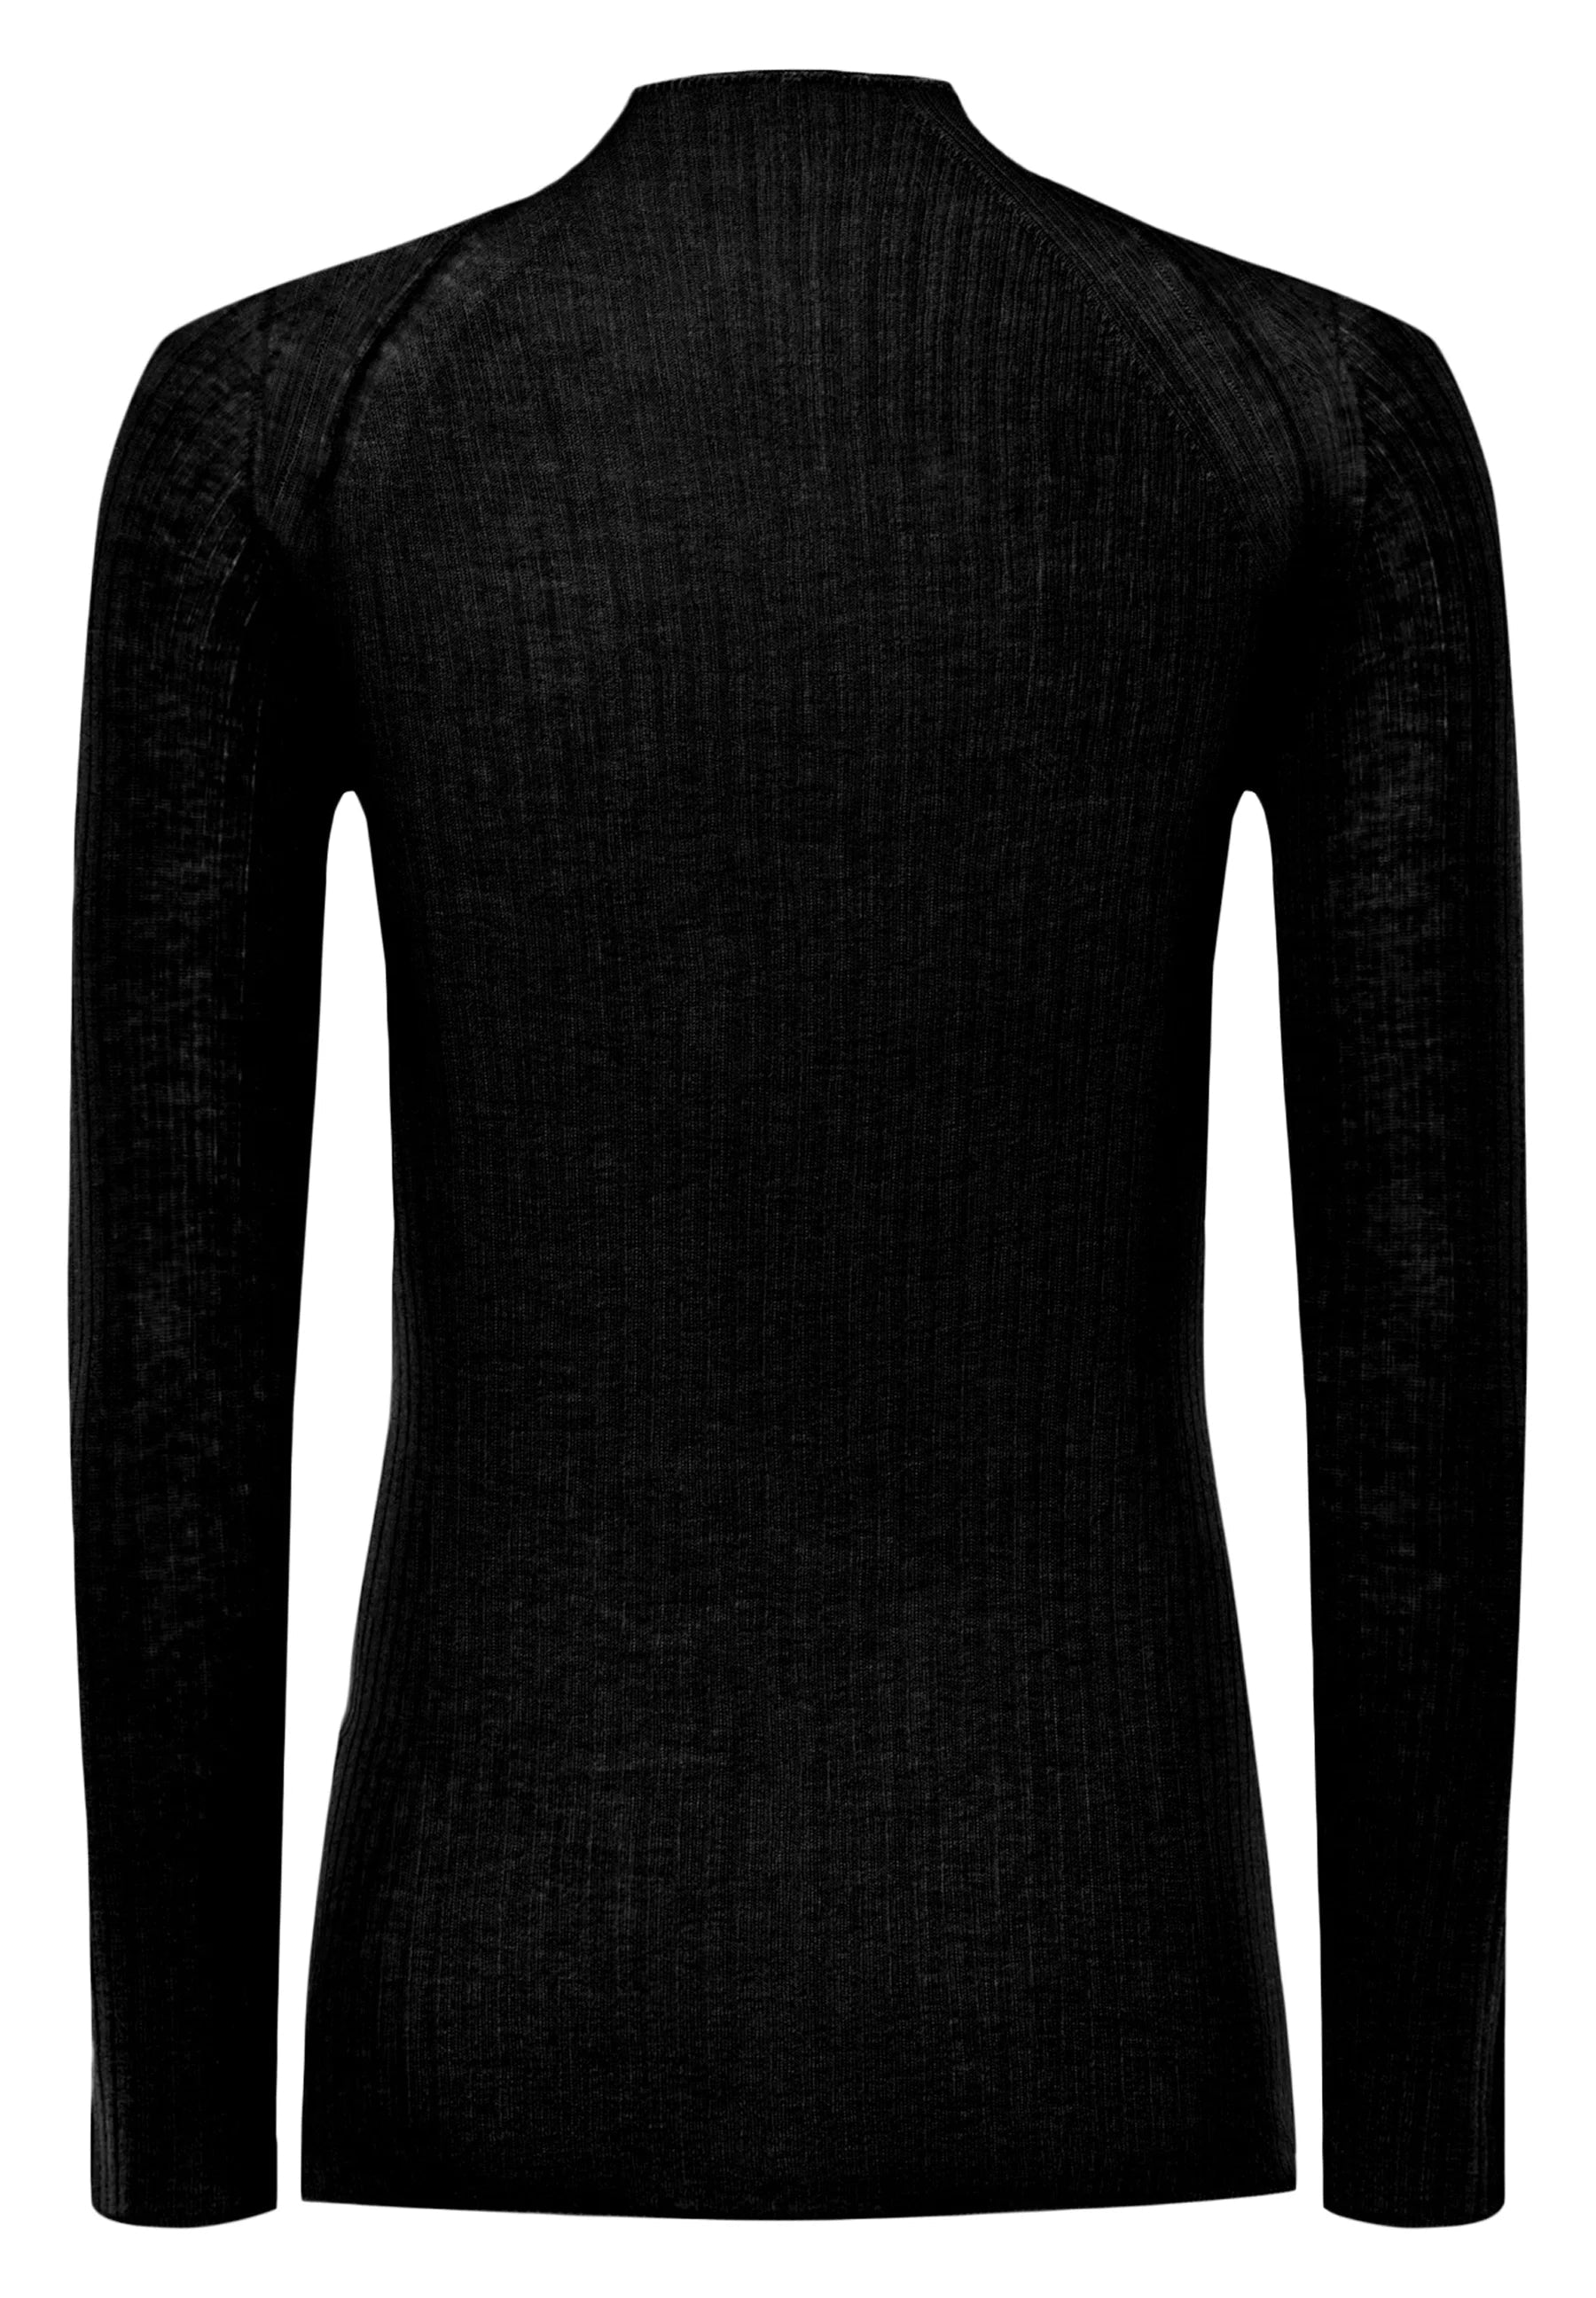 Air Wool Contrast Top LS-Shirts-Wolford-OUTLET-XS-Black-ARCHIVIST